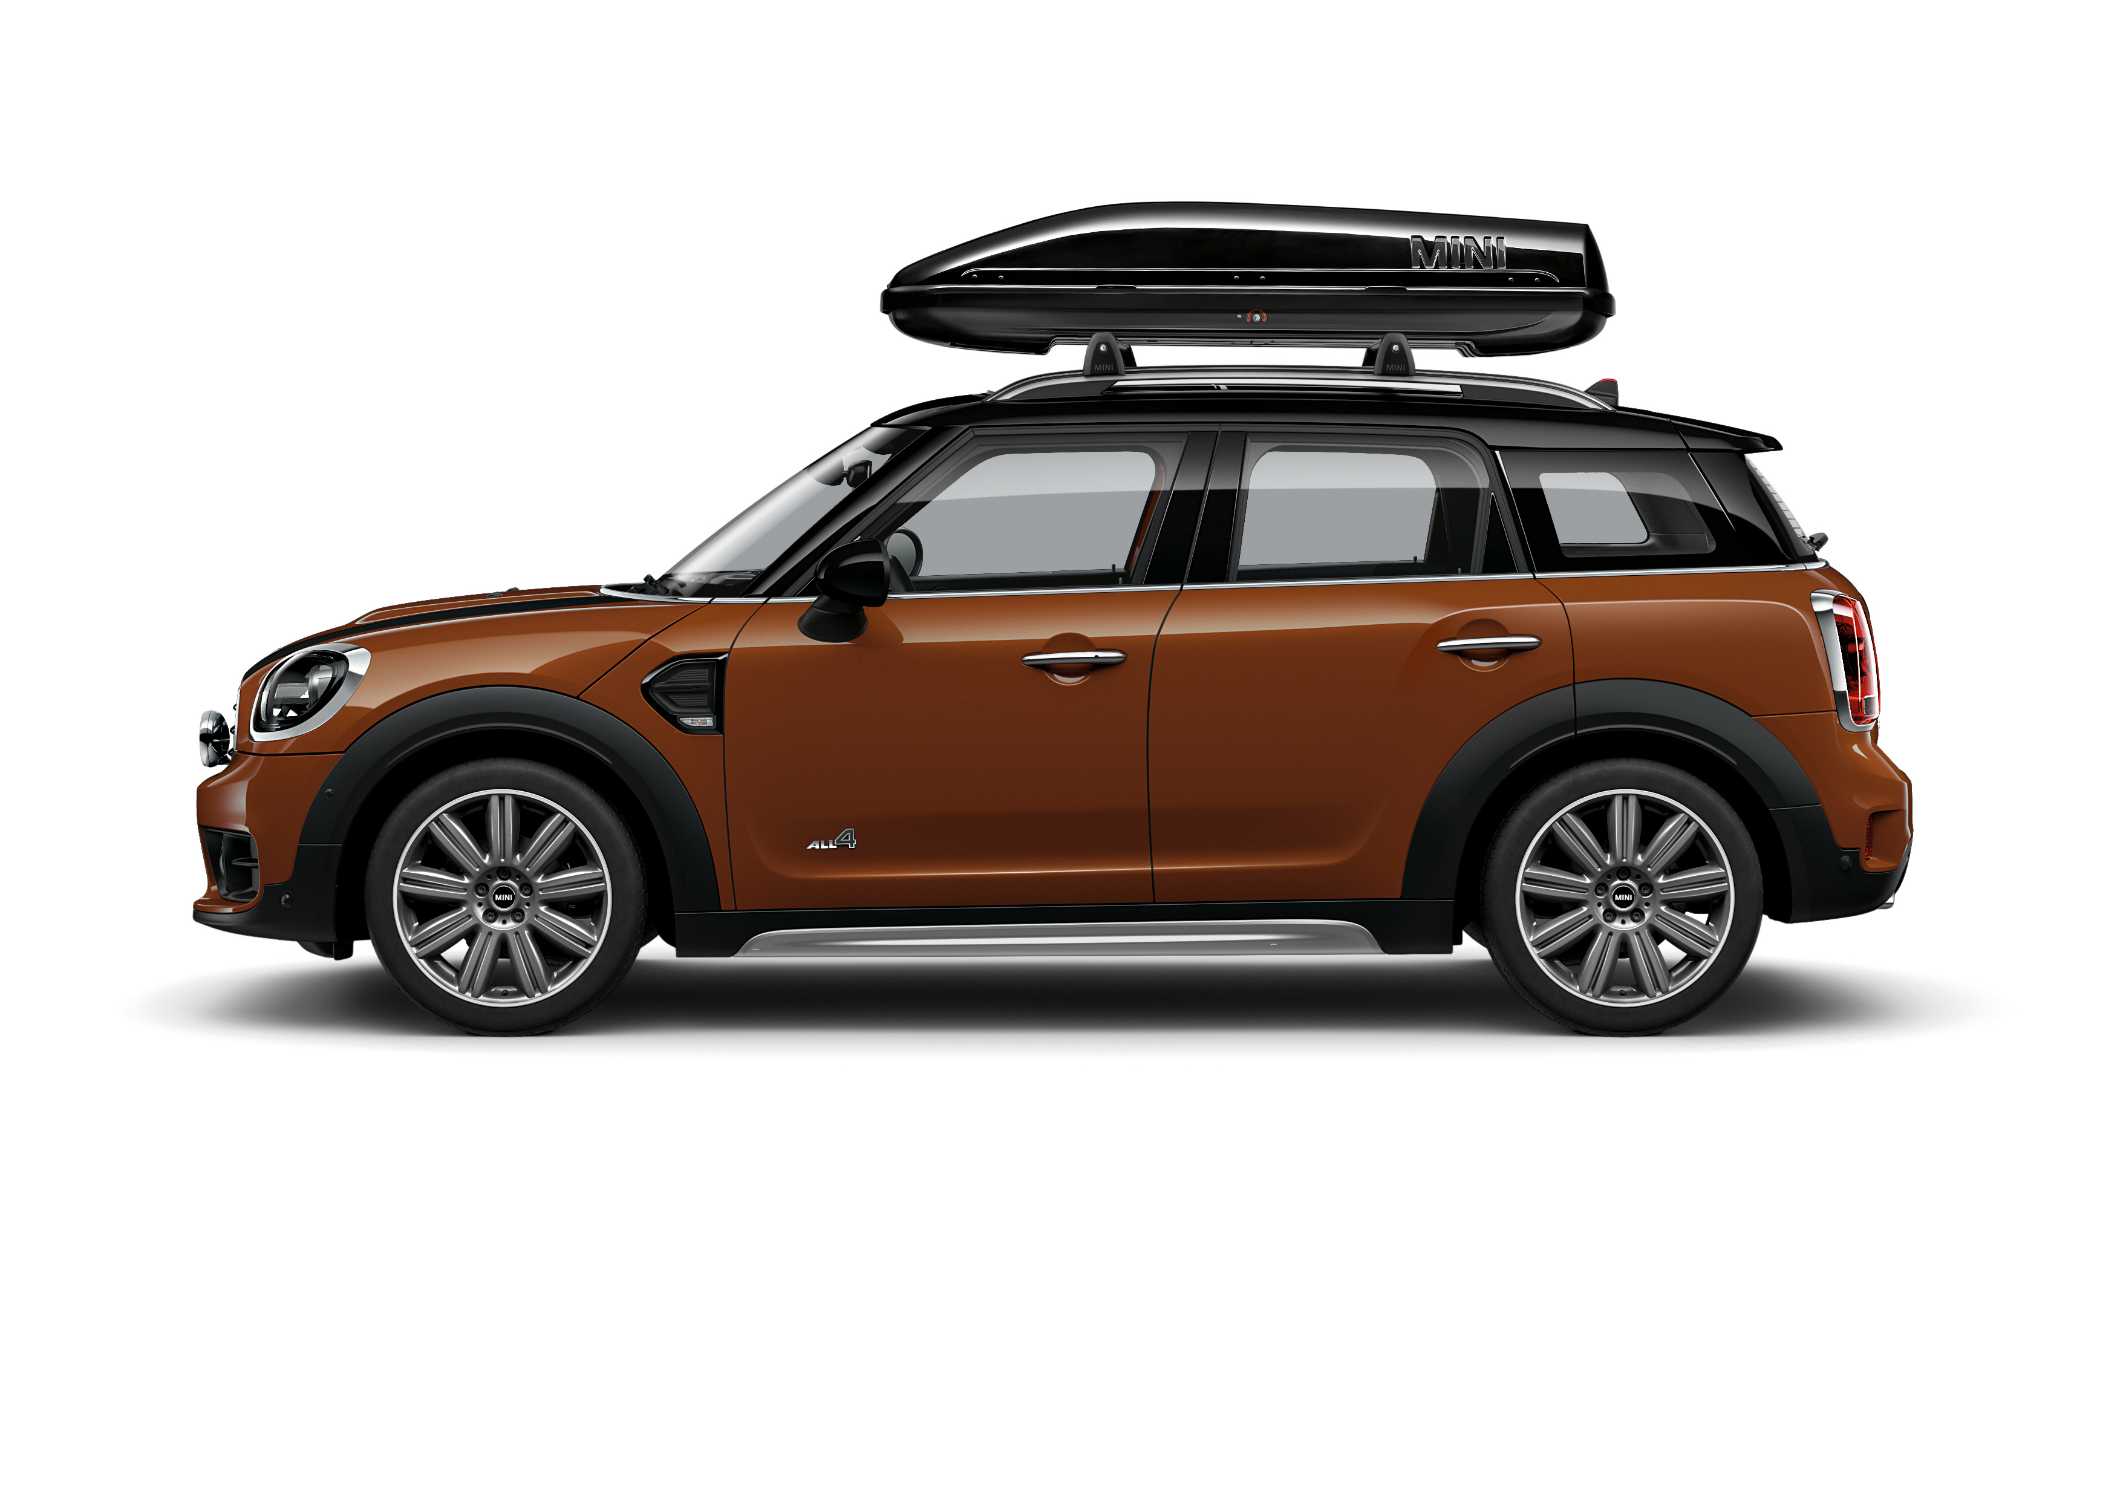 MINI Cooper Countryman with additional LED headlights chrome, roof rack base support system for